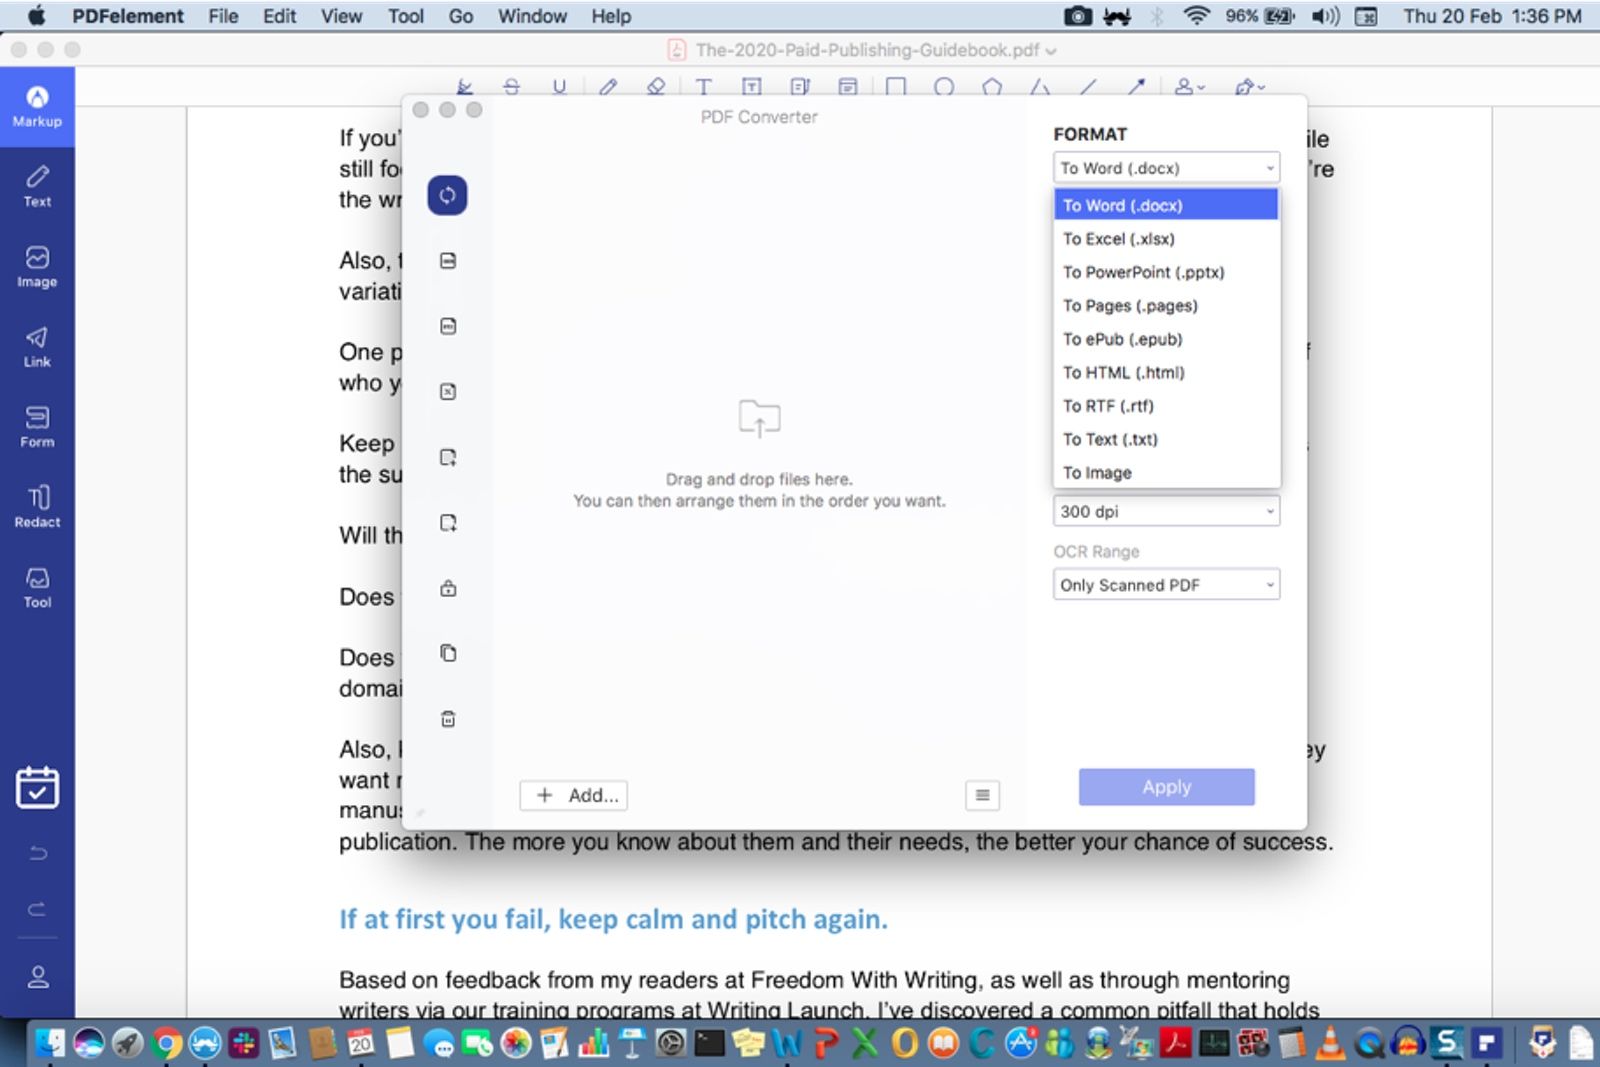 Image shows the PDF conversion feature in PDFelement 7 for Mac